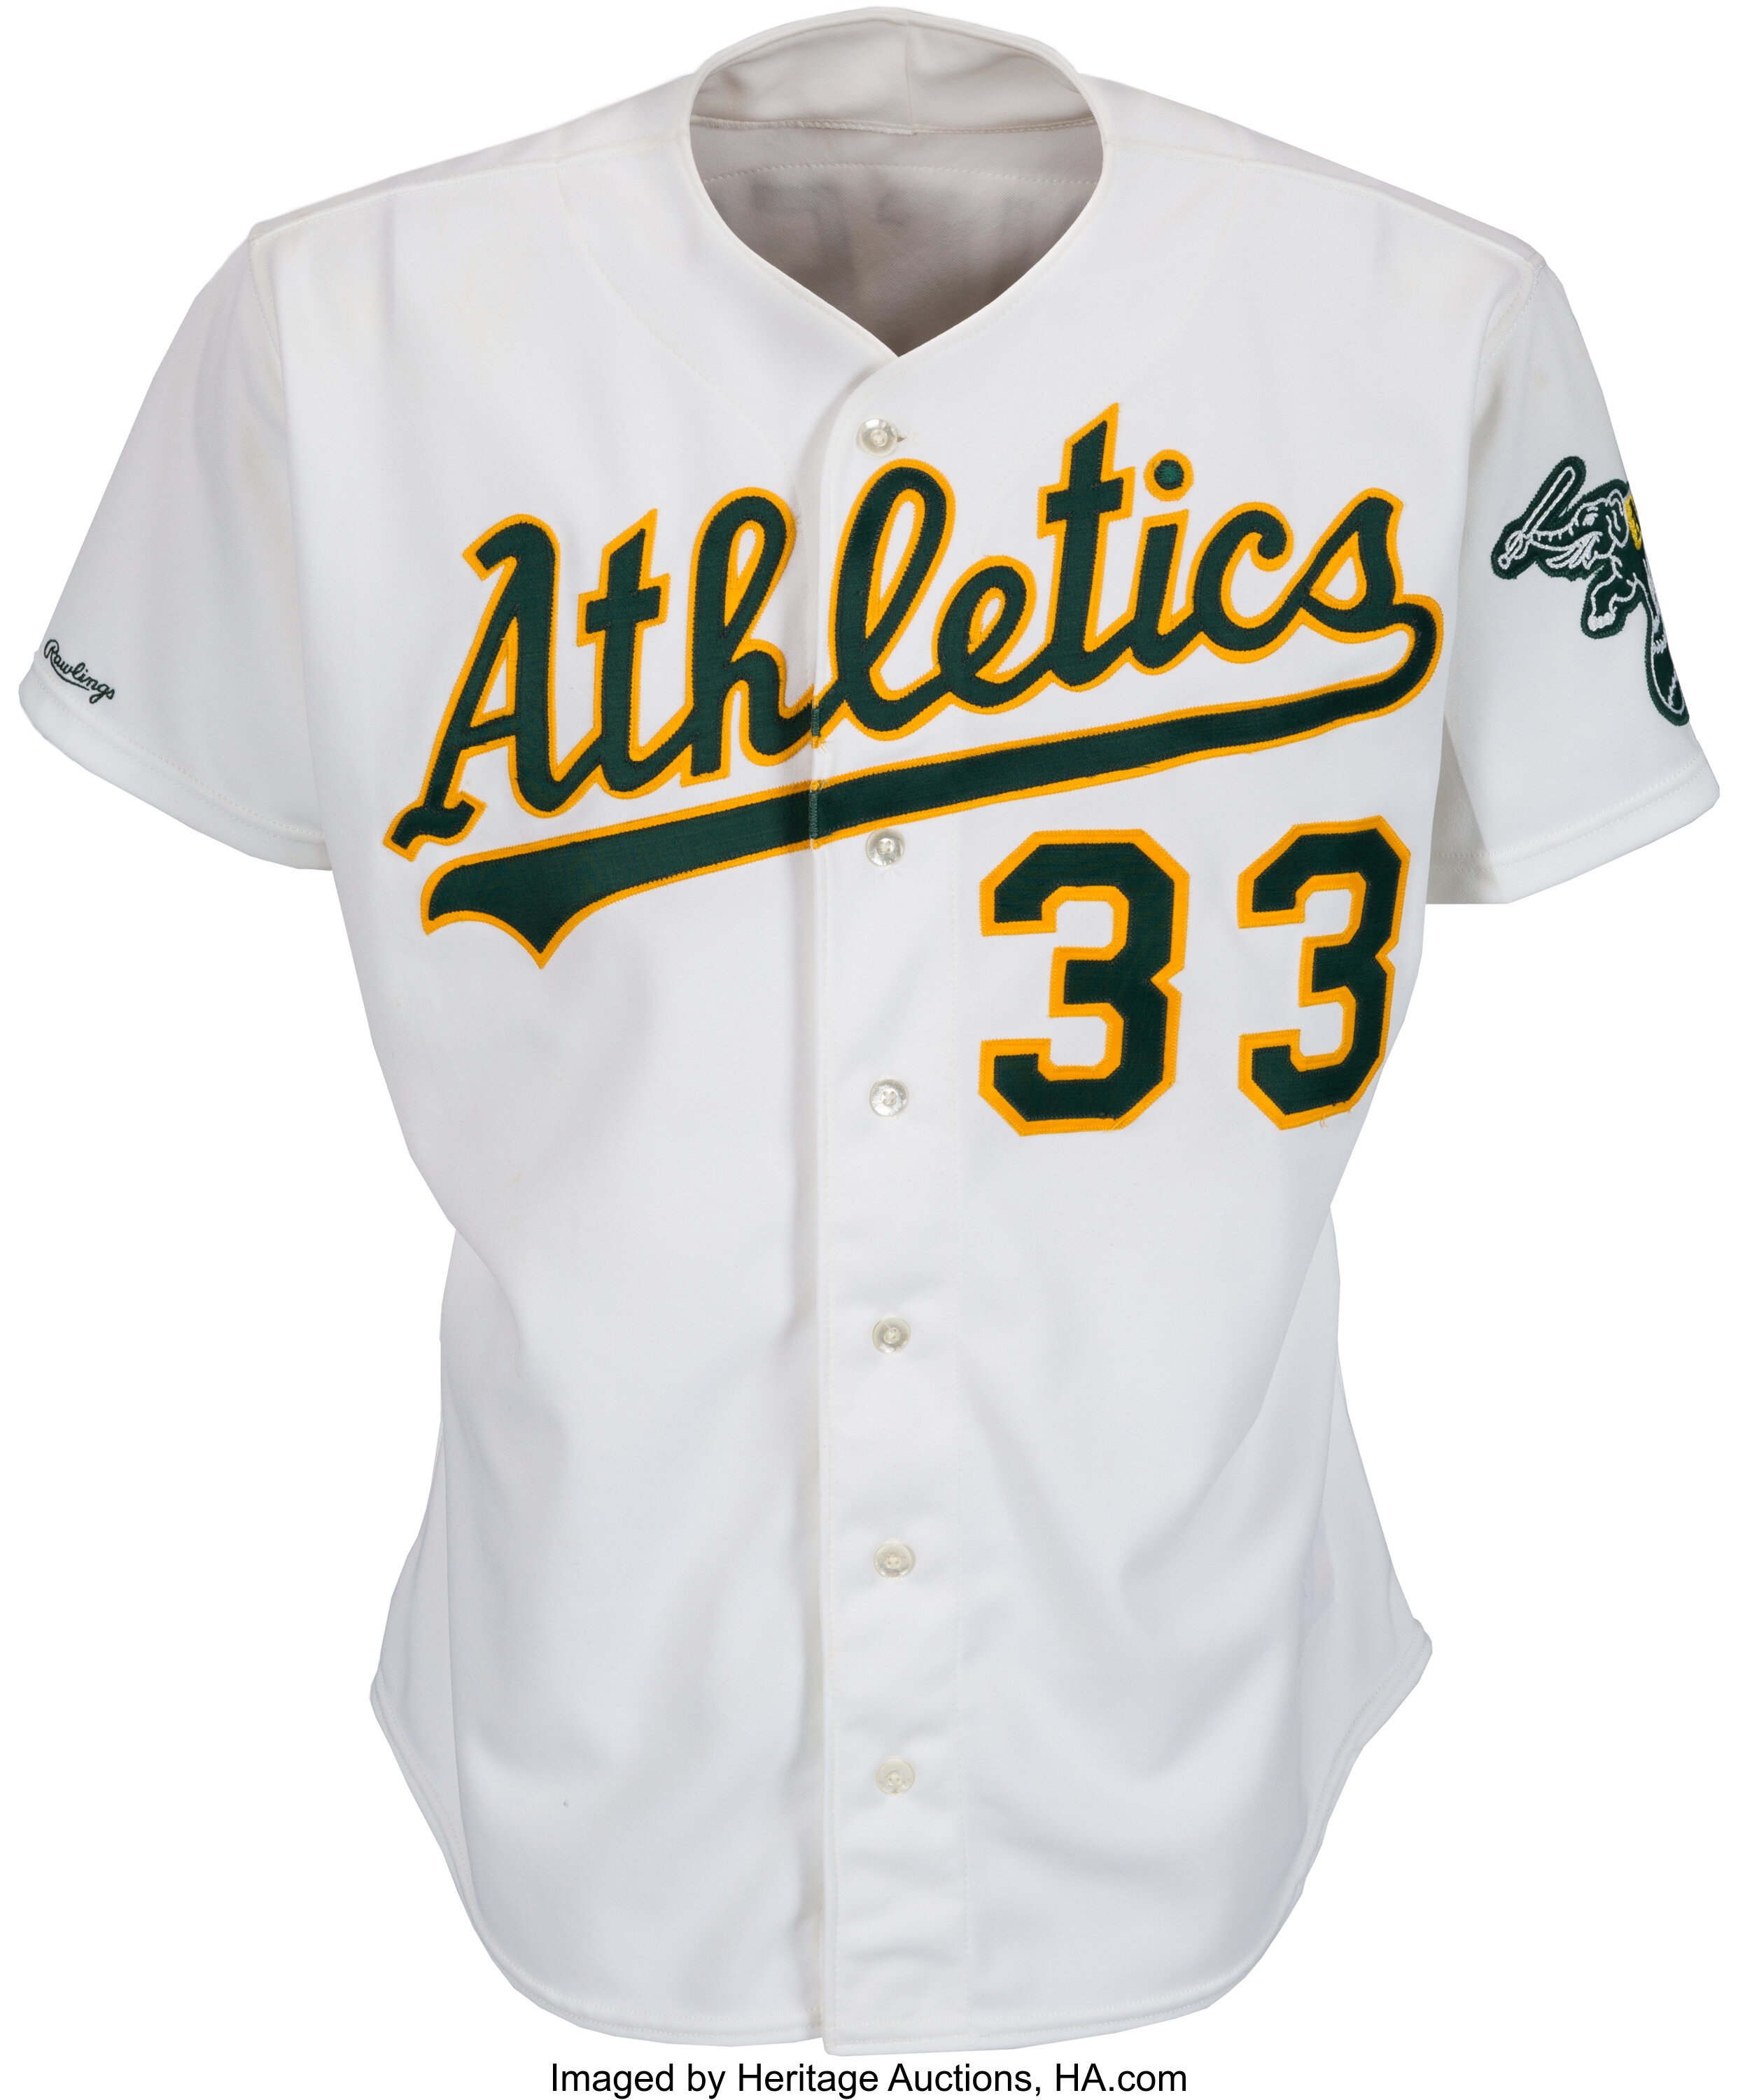 Jose Canseco Signed Oakland A's (Athletics) White Jersey Batting